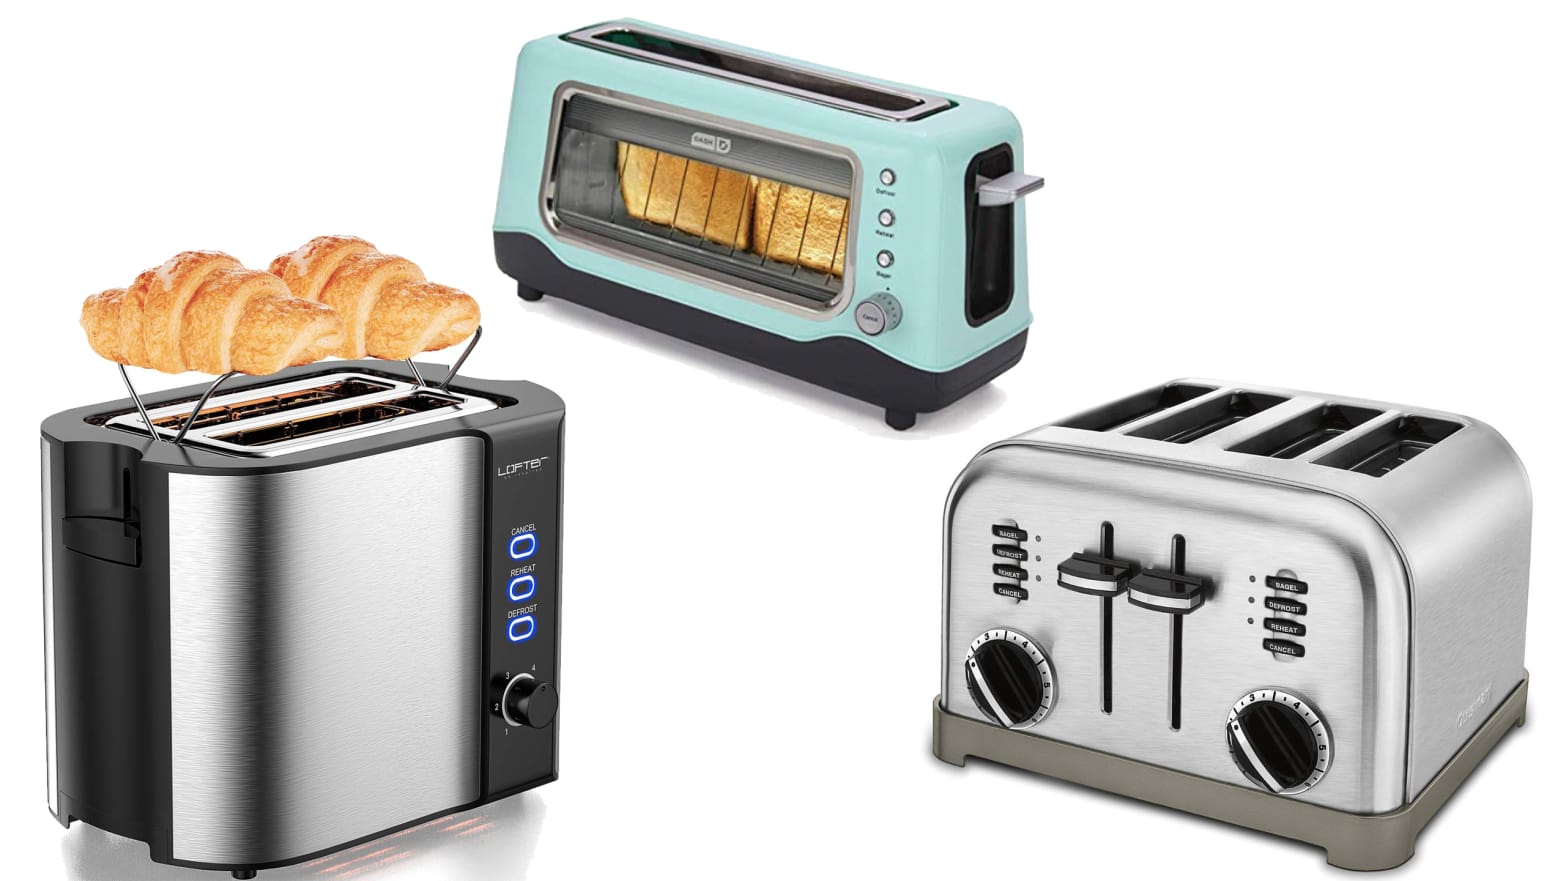 Detail Images Of Toasters Nomer 9